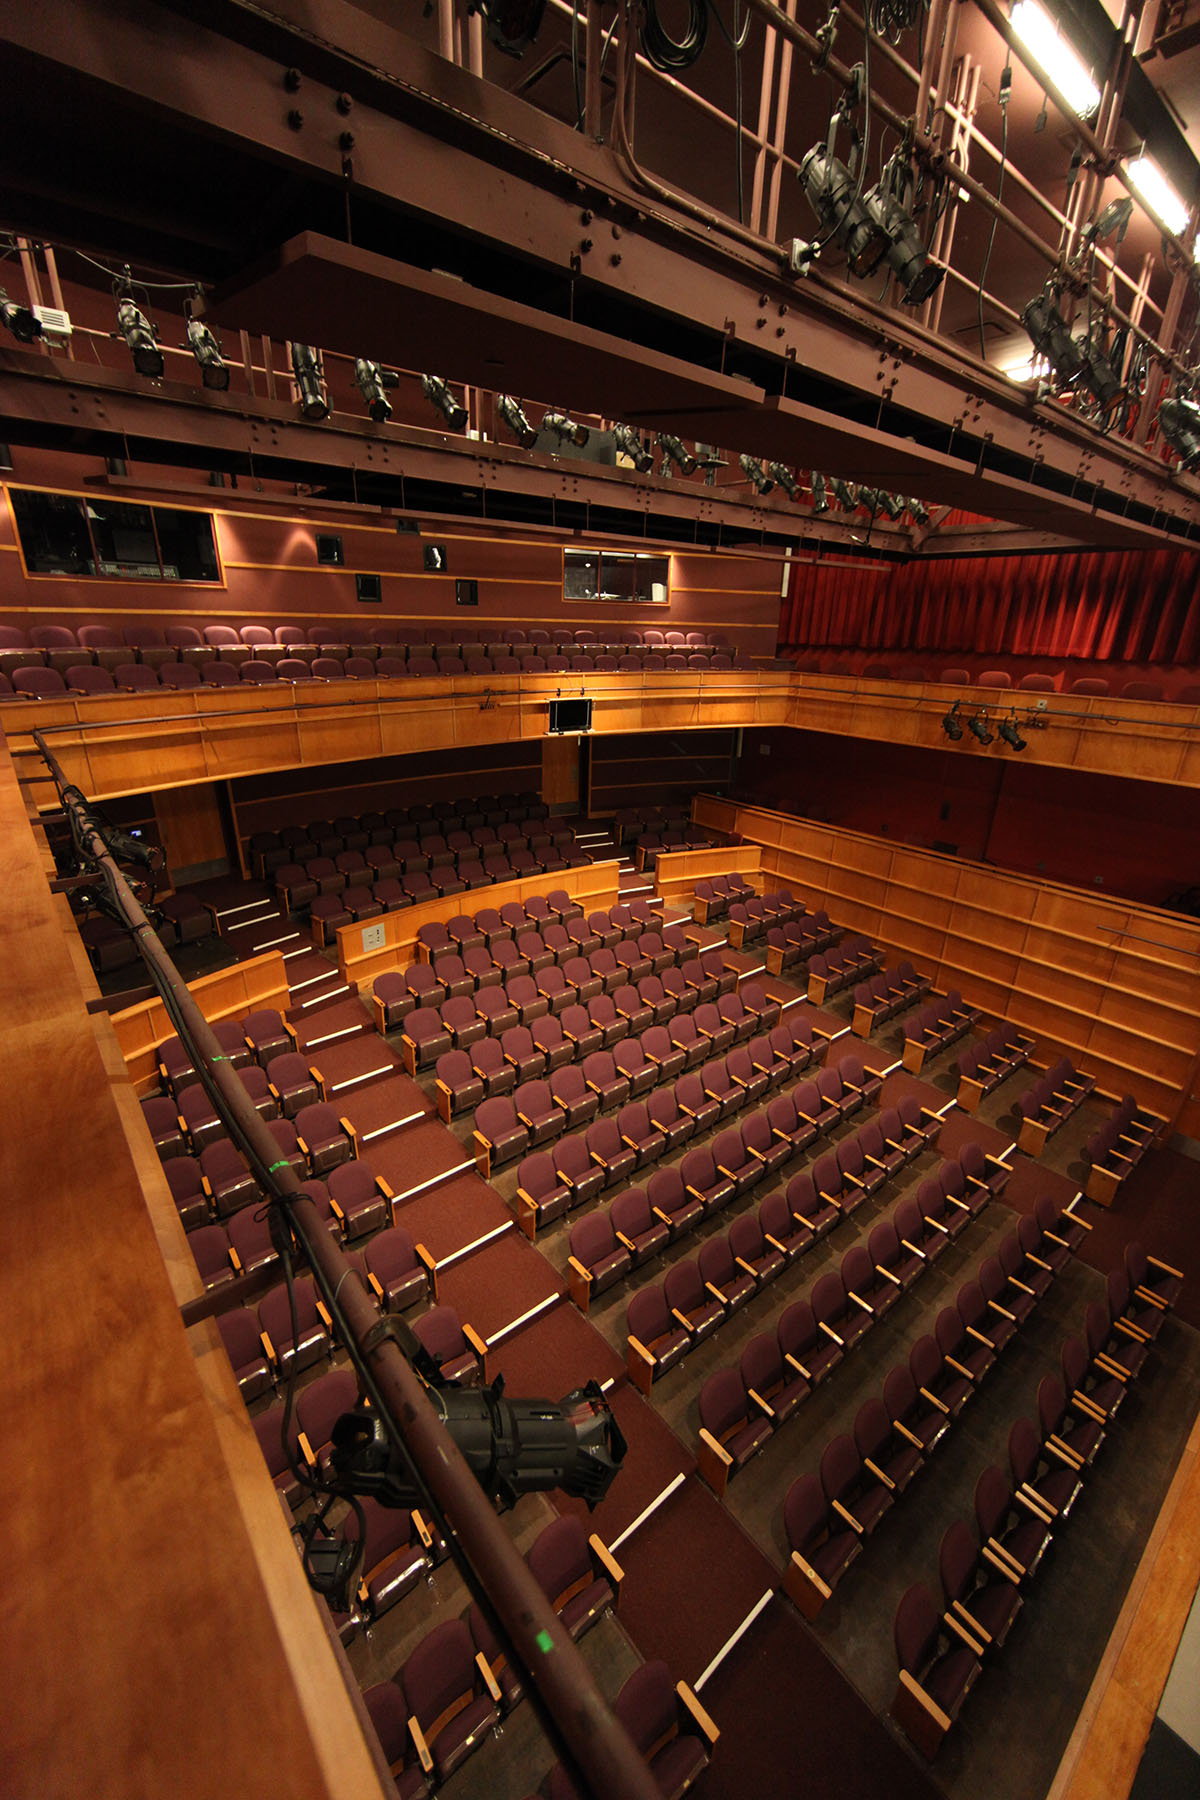 Inside the Martel Theater, seating and lights